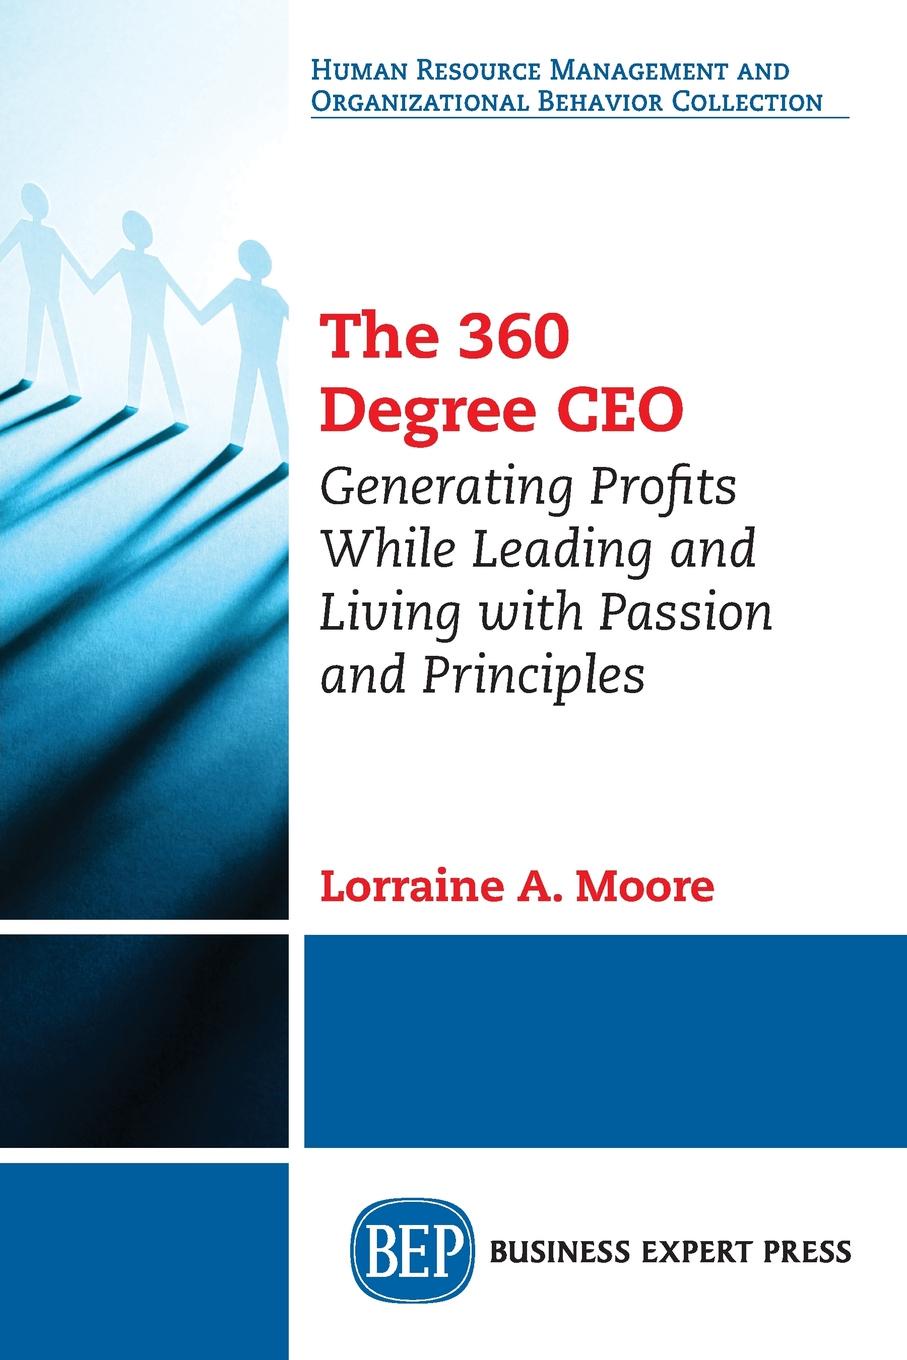 The 360 Degree CEO. Generating Profits While Leading and Living with Passion and Principles